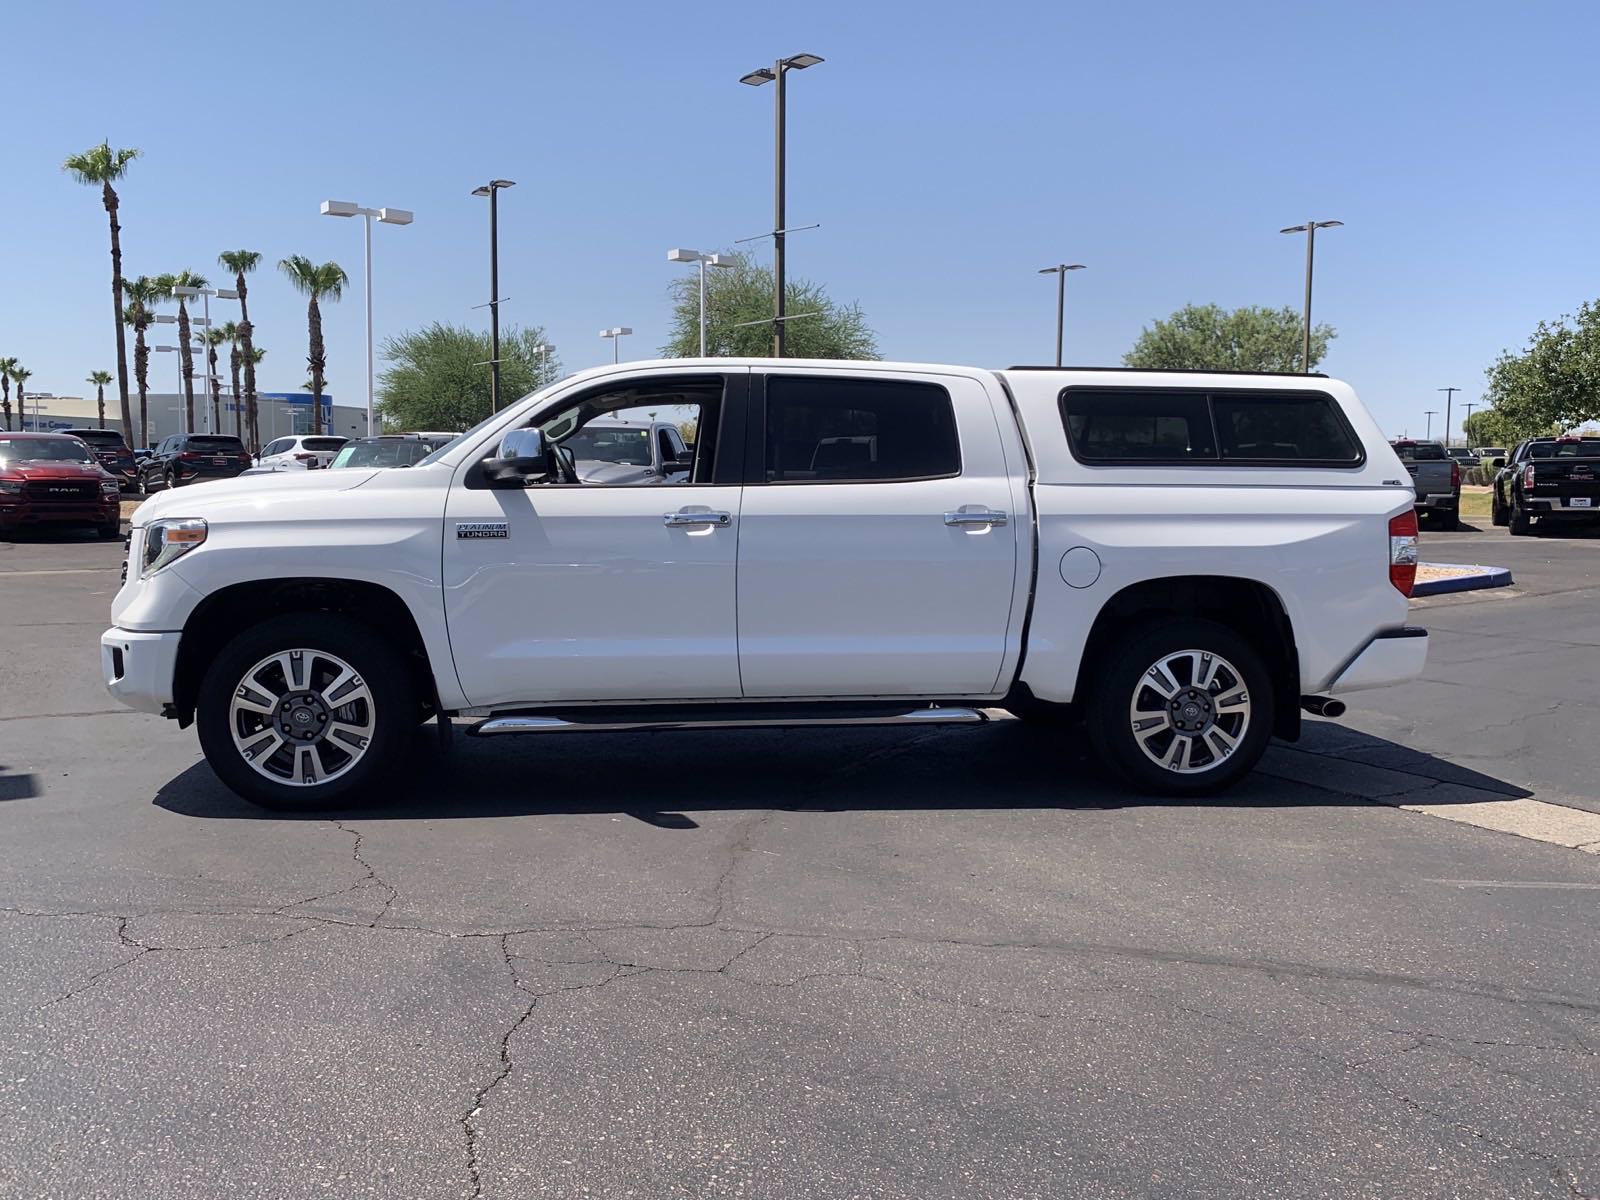 Pre-Owned 2019 Toyota Tundra 4WD Platinum Crew Cab Pickup in Tempe #